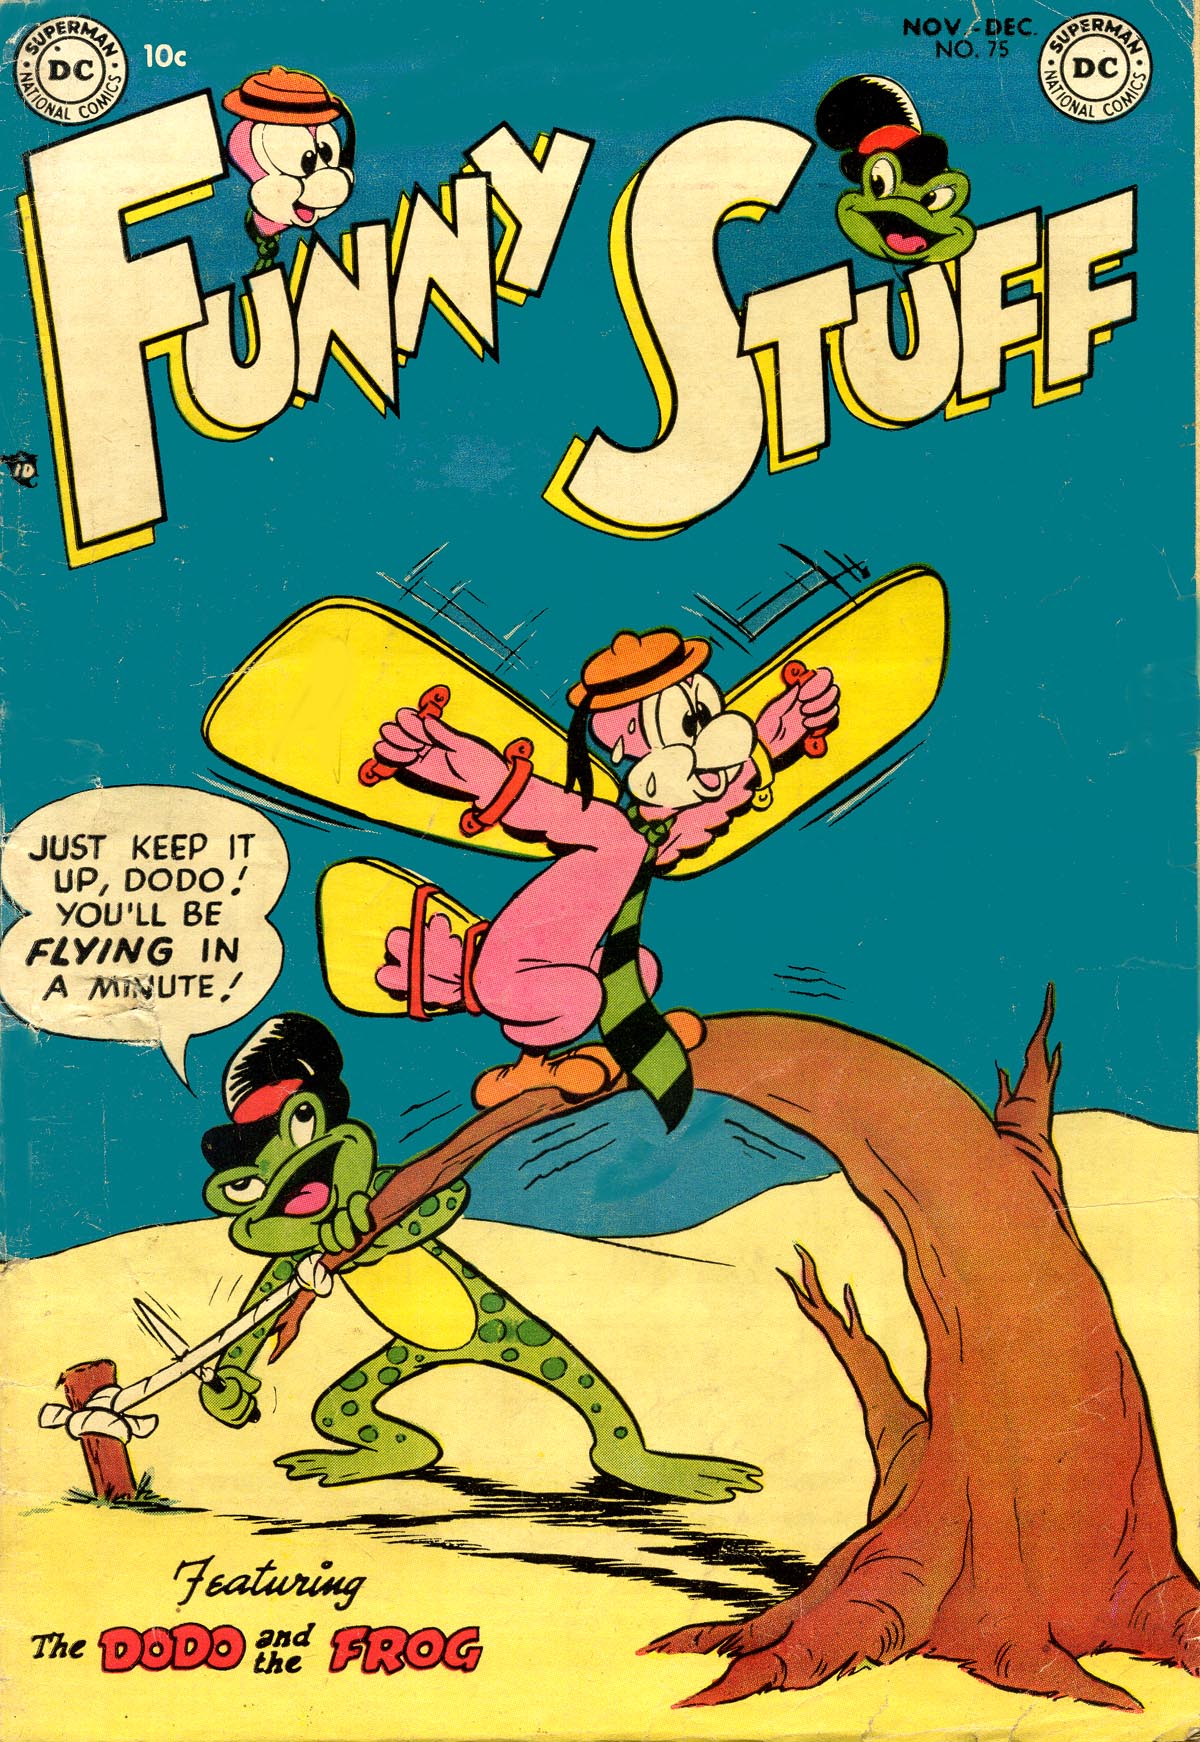 Read online Funny Stuff comic -  Issue #75 - 1